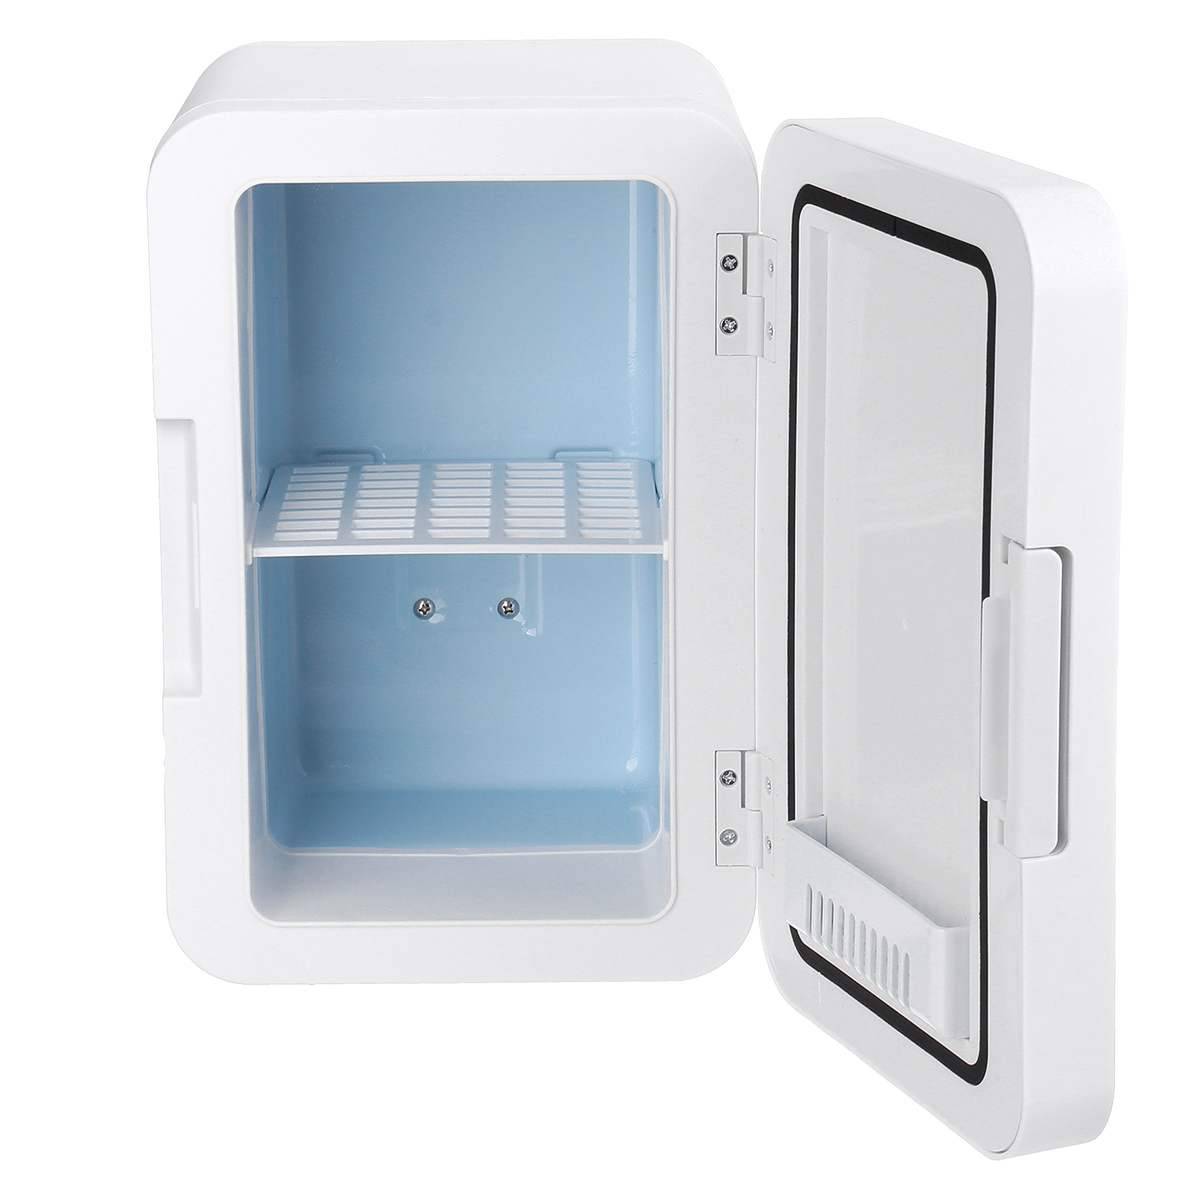 COOLBABY CZBX13 8L Mini Fridge Versatile Cooler and Warmer - COOL BABY